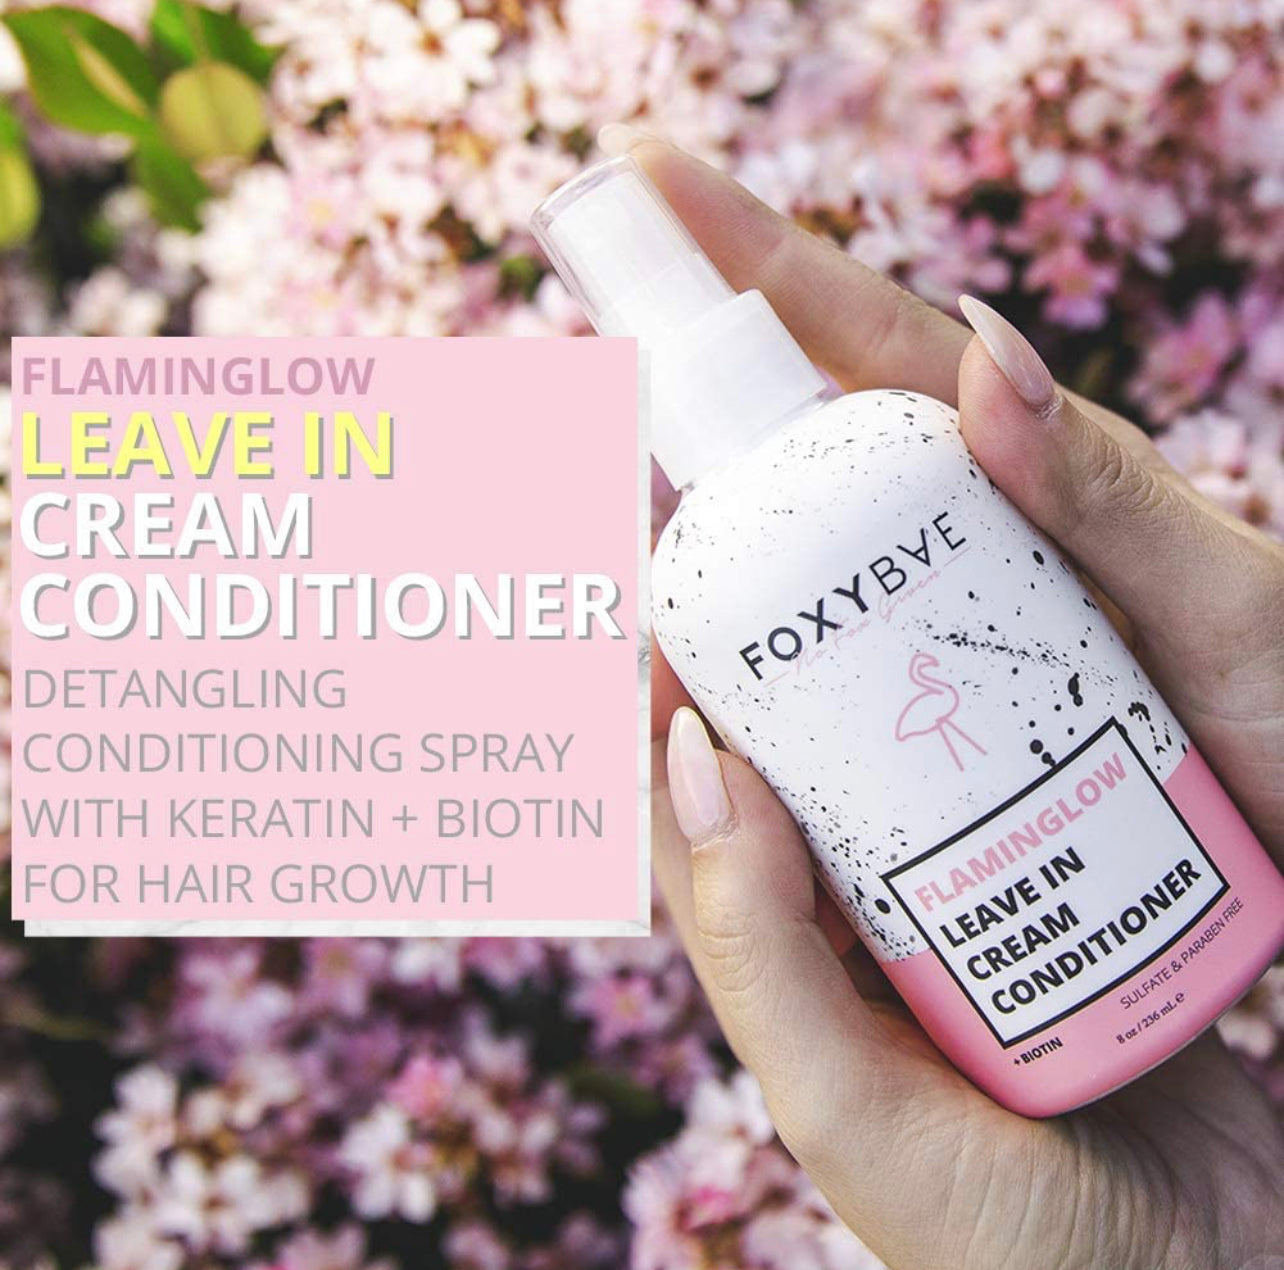 Leave In Hair Conditioner by FoxyBae  Flaminglow